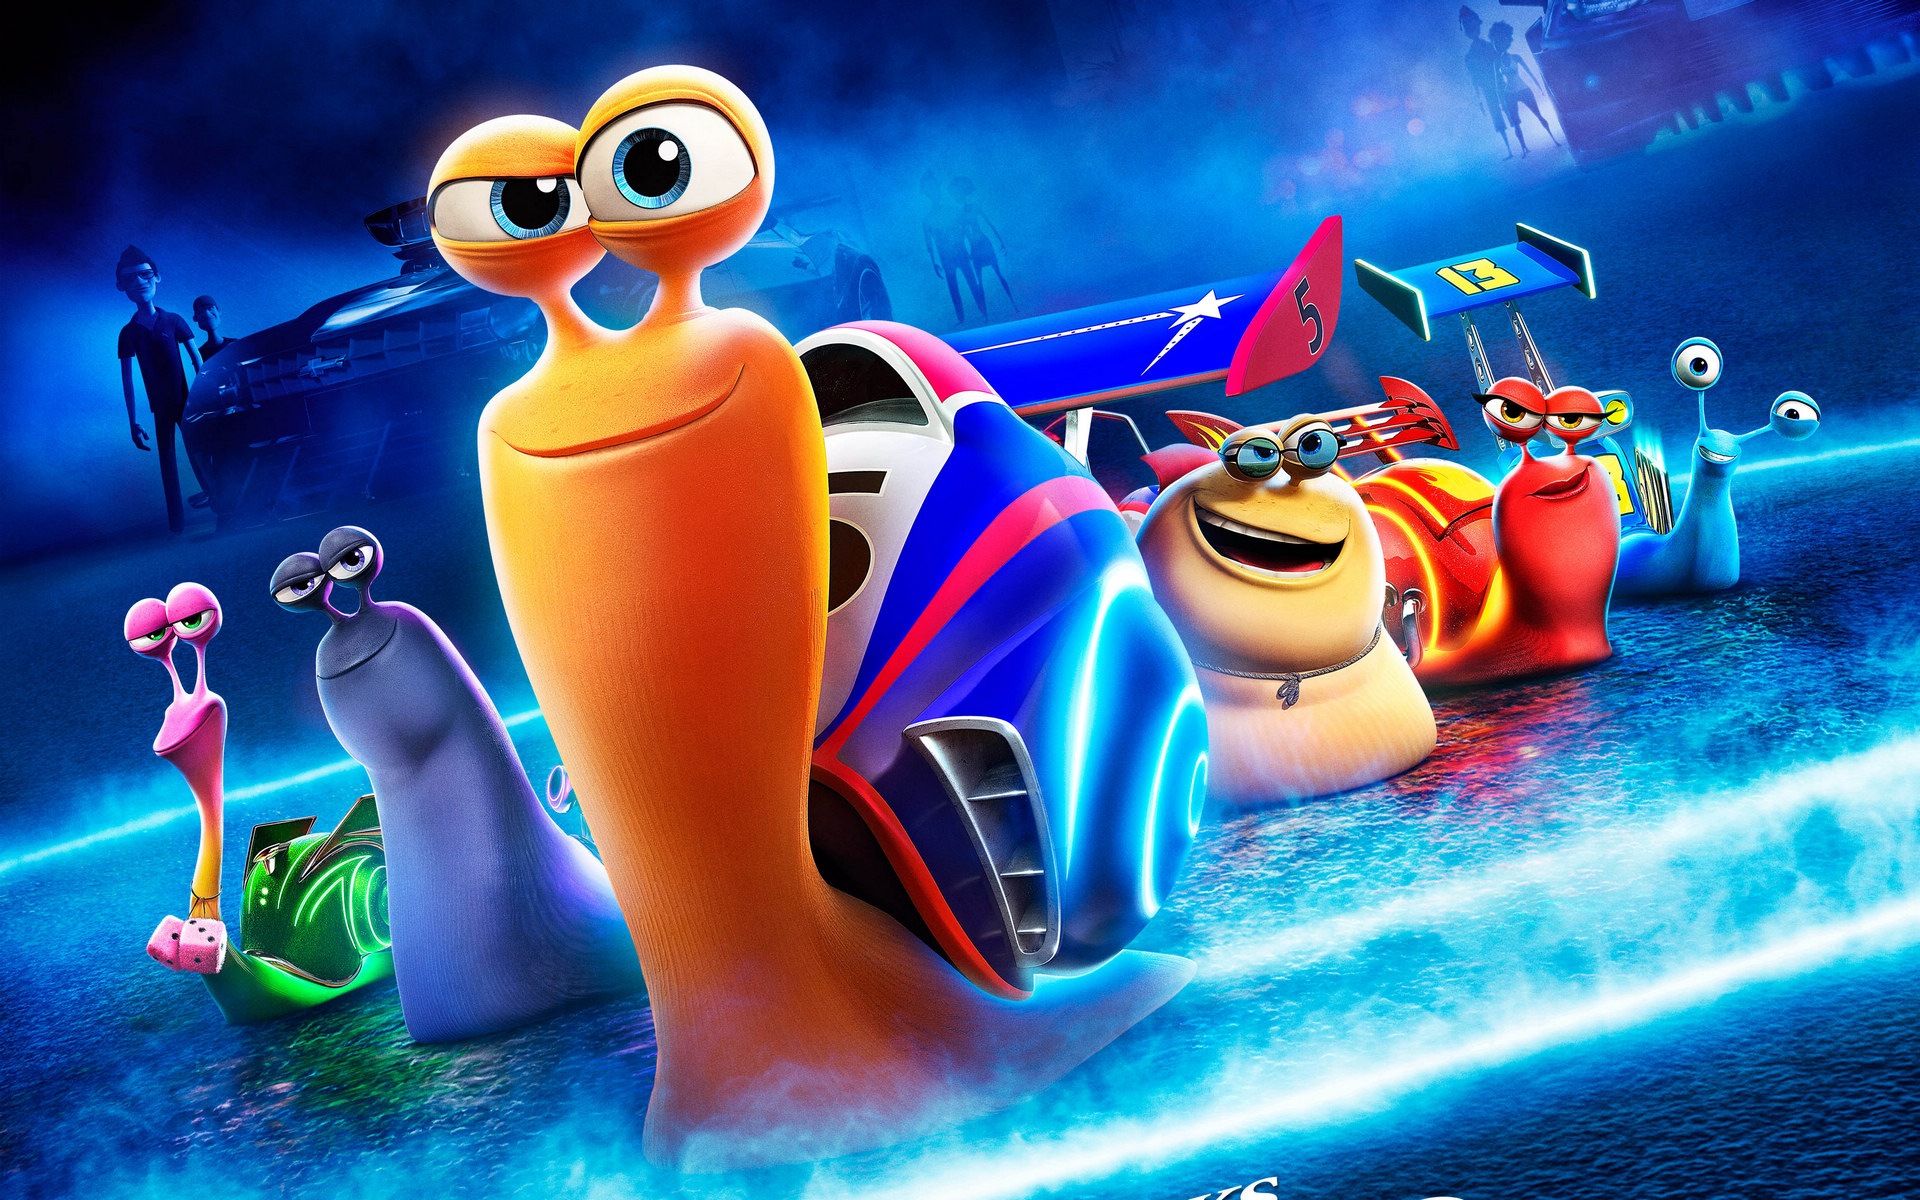 Turbo 3D movie HD wallpapers #1 - 1920x1200